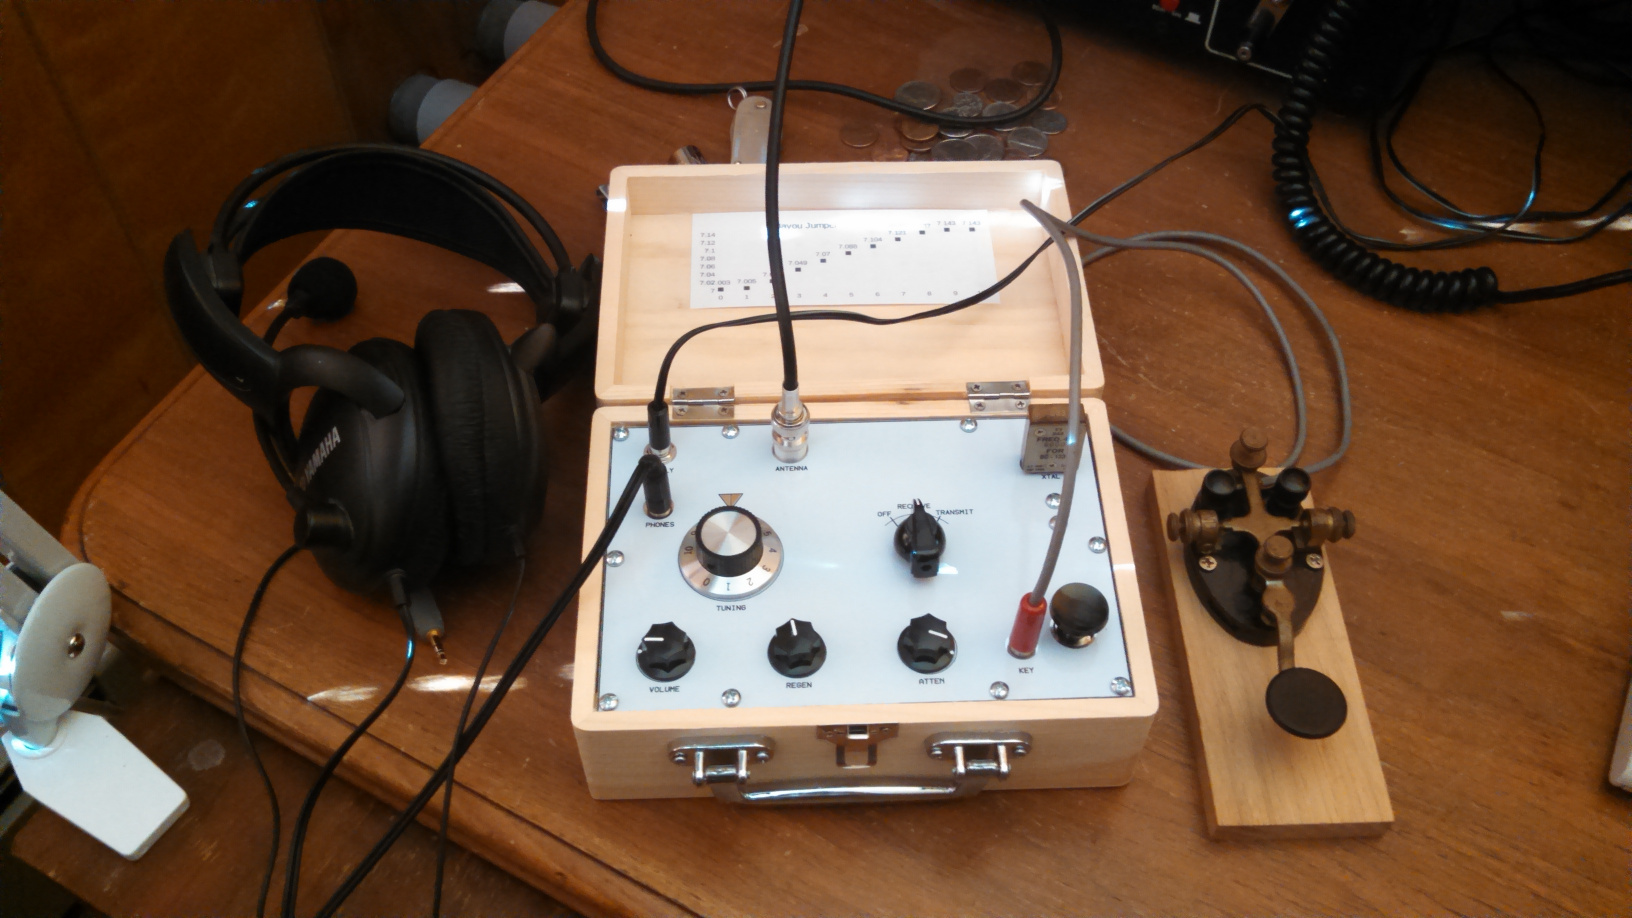 The completed Bayou Jumper set up for a contact with KD9ELU with headphones and external telegraph key.